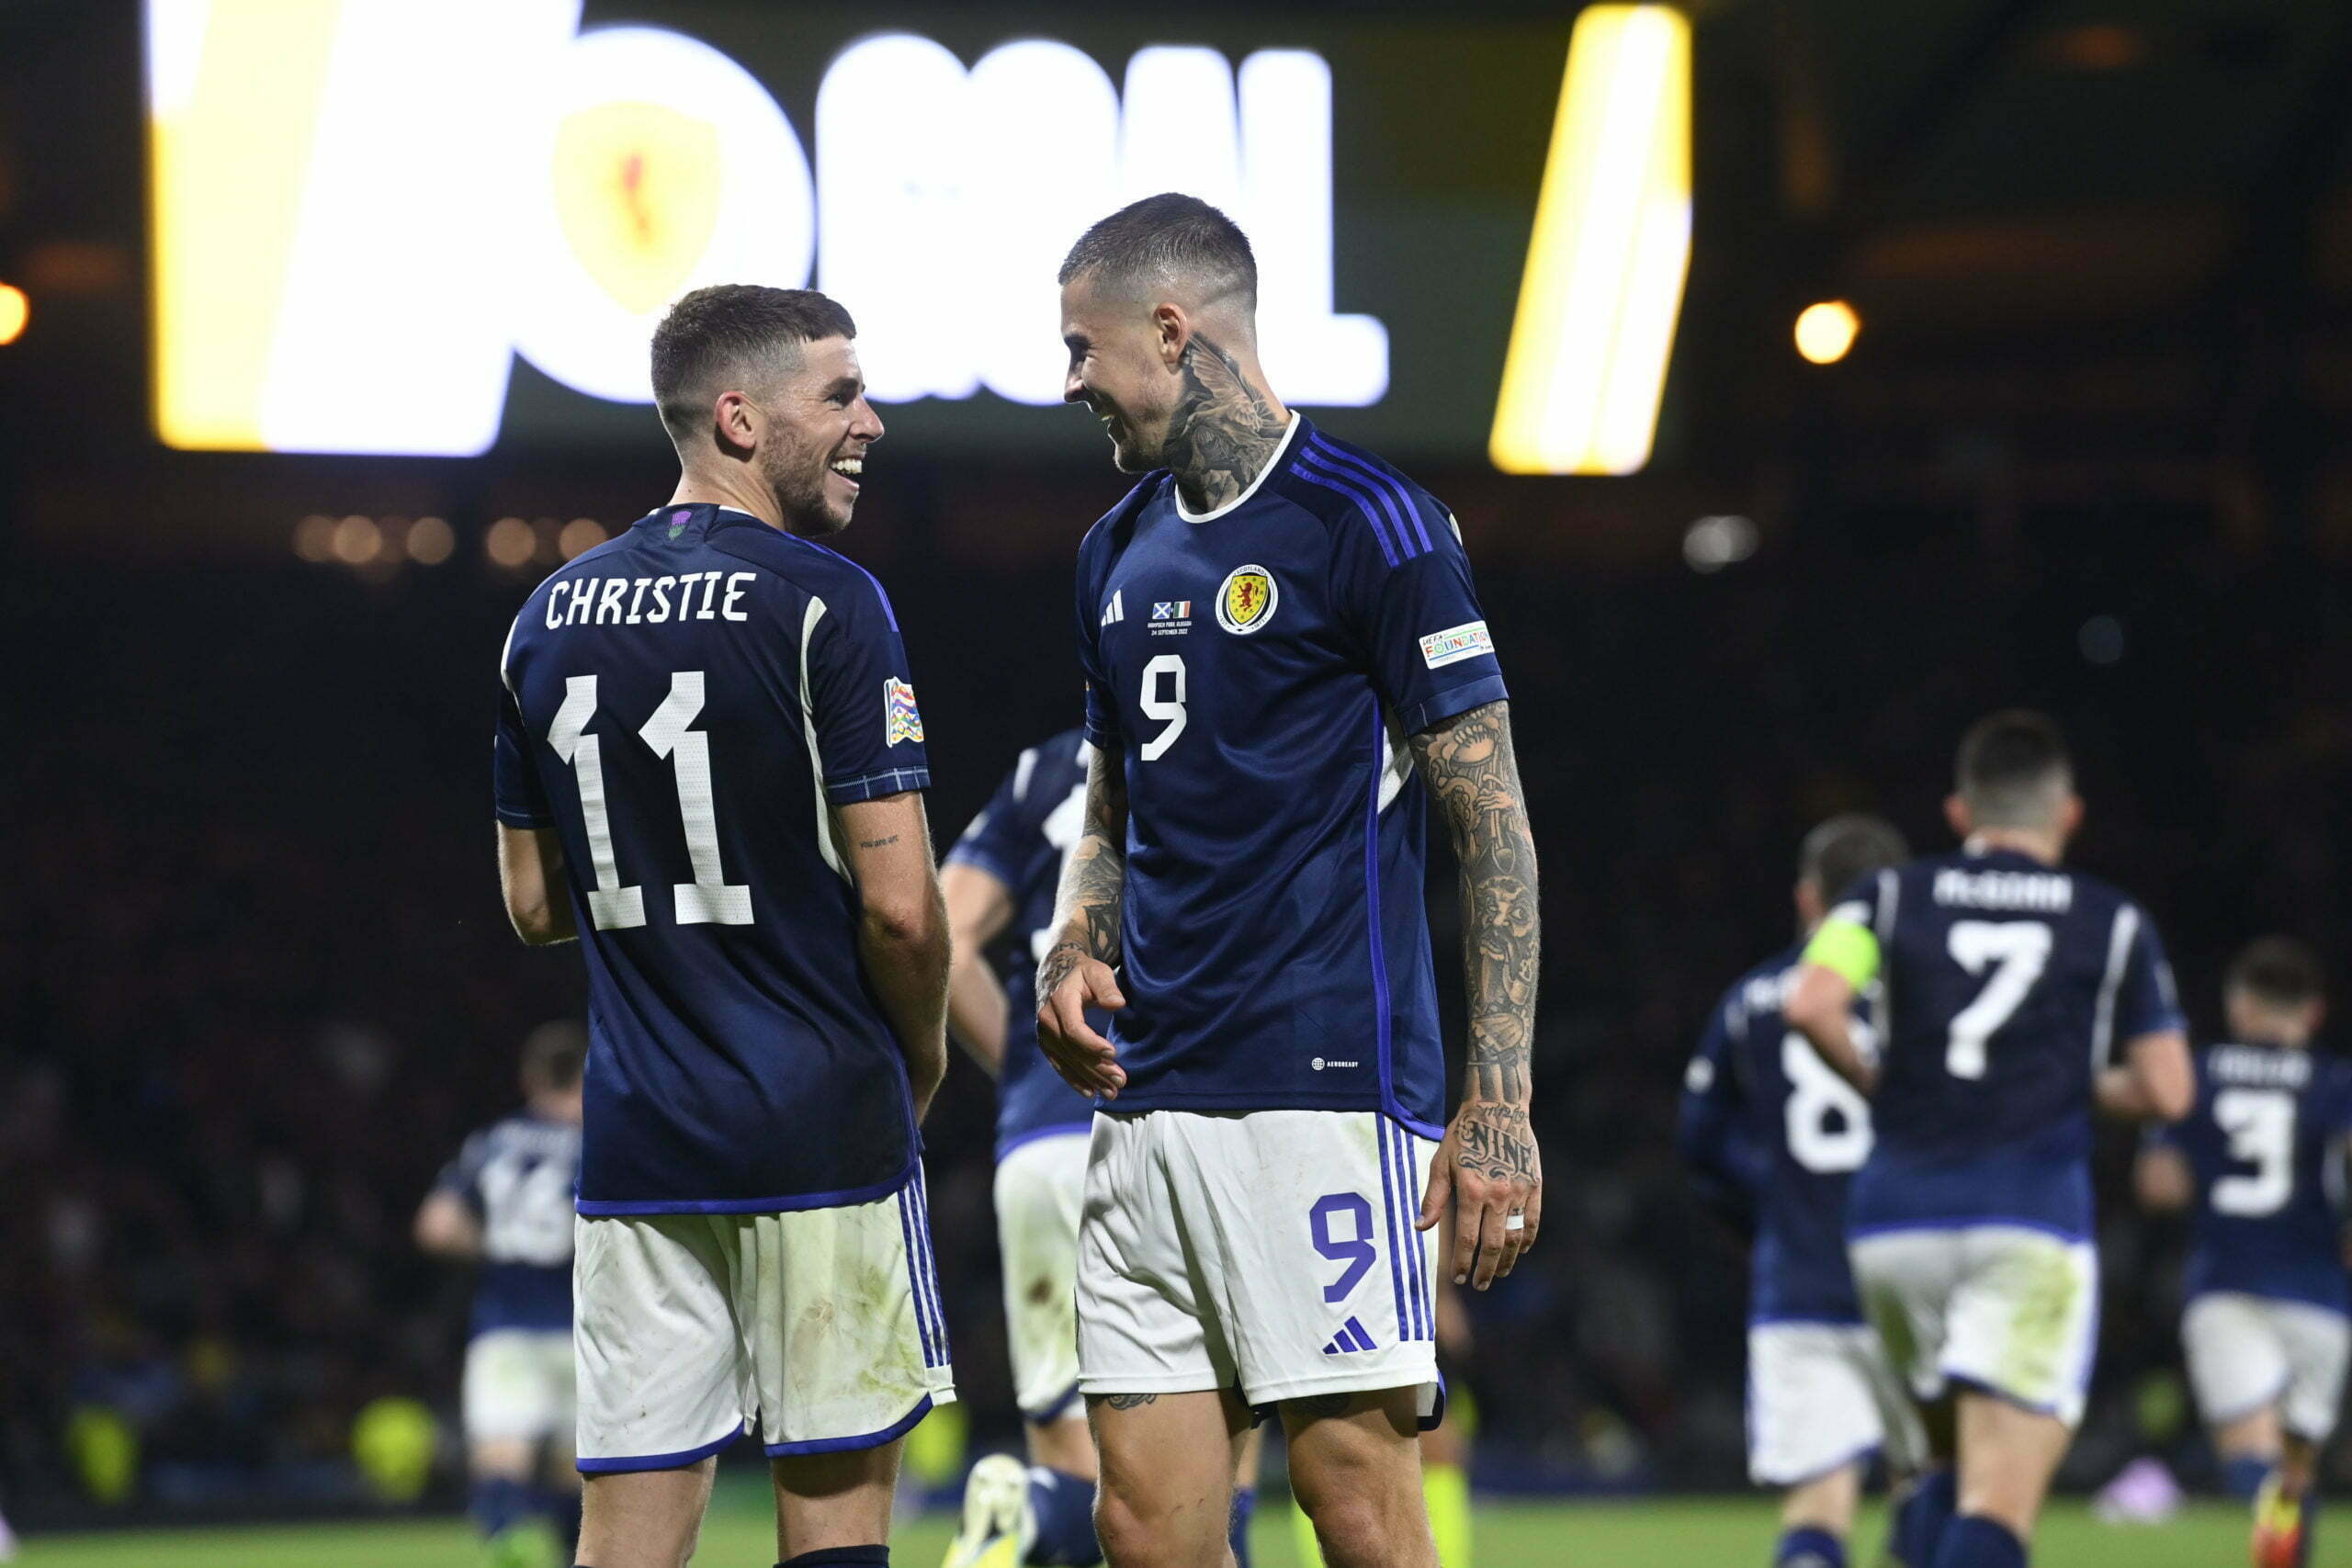 3 things we learned from Scotland’s Nations League wins